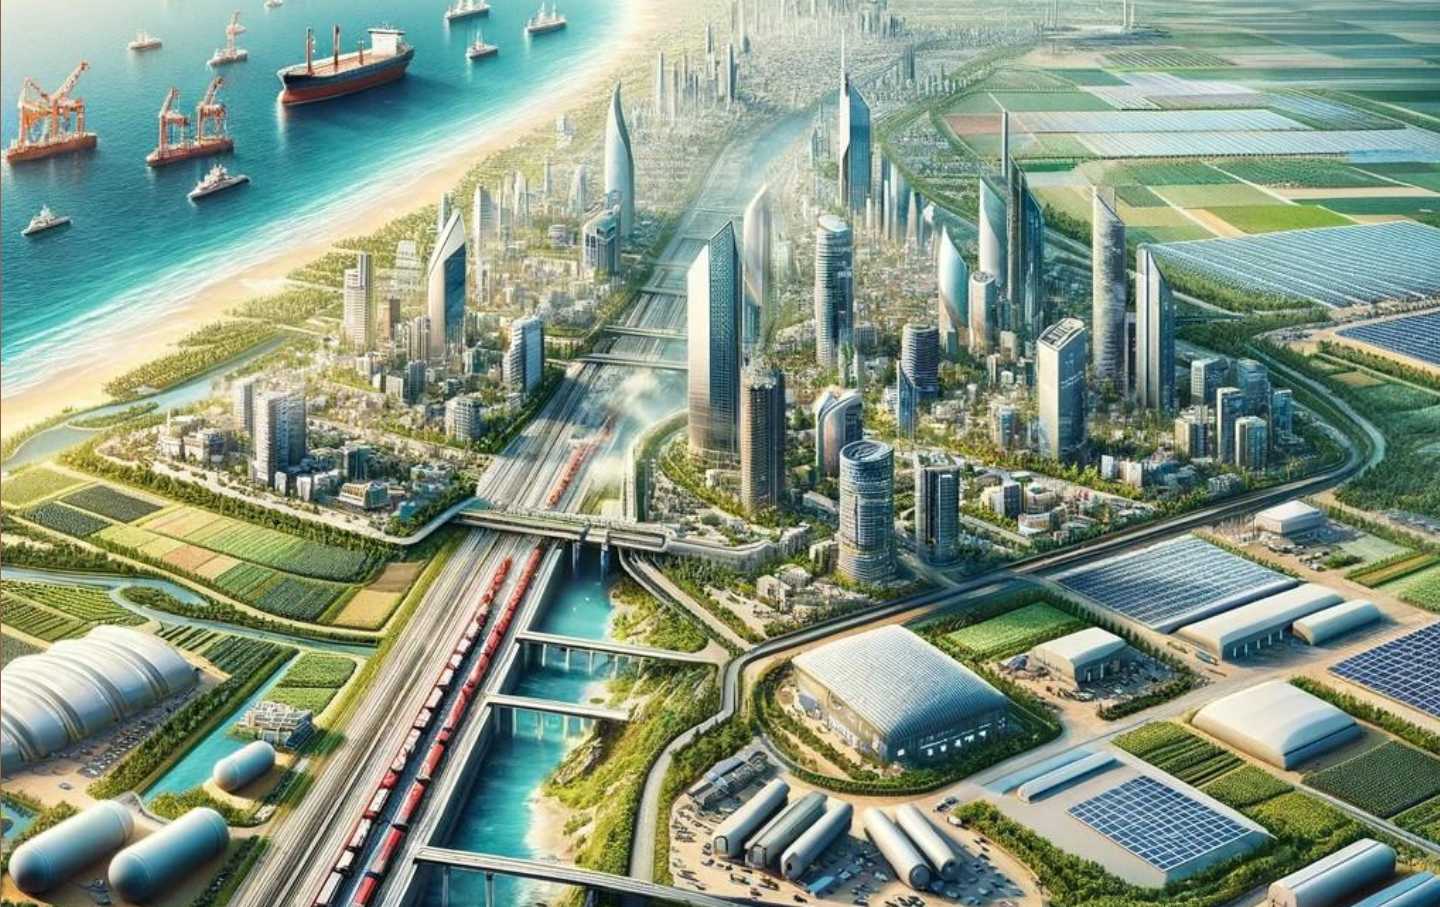 Screenshot of CGI image in proposal titled “From Crisis to Prosperity.”